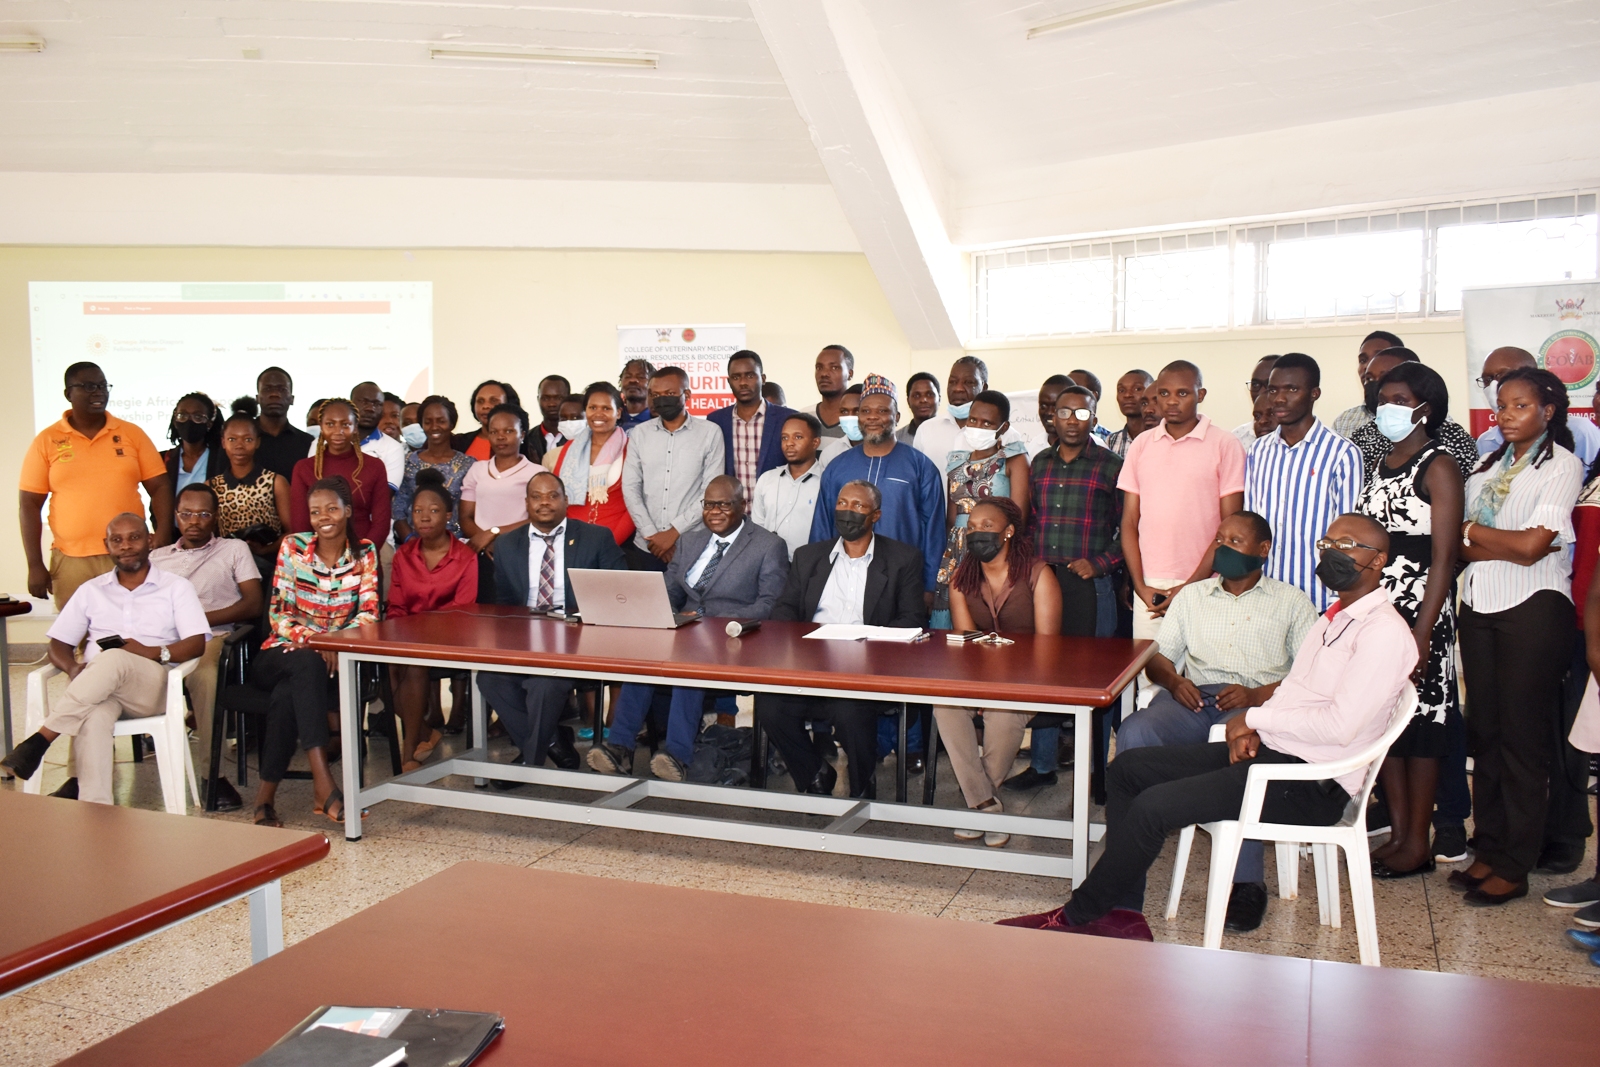 Facilitators and participants in the training on Research Methods, Experimental Design and Data Analysis take off time for a group photo on 1st April 2022, CoVAB, Makerere University.